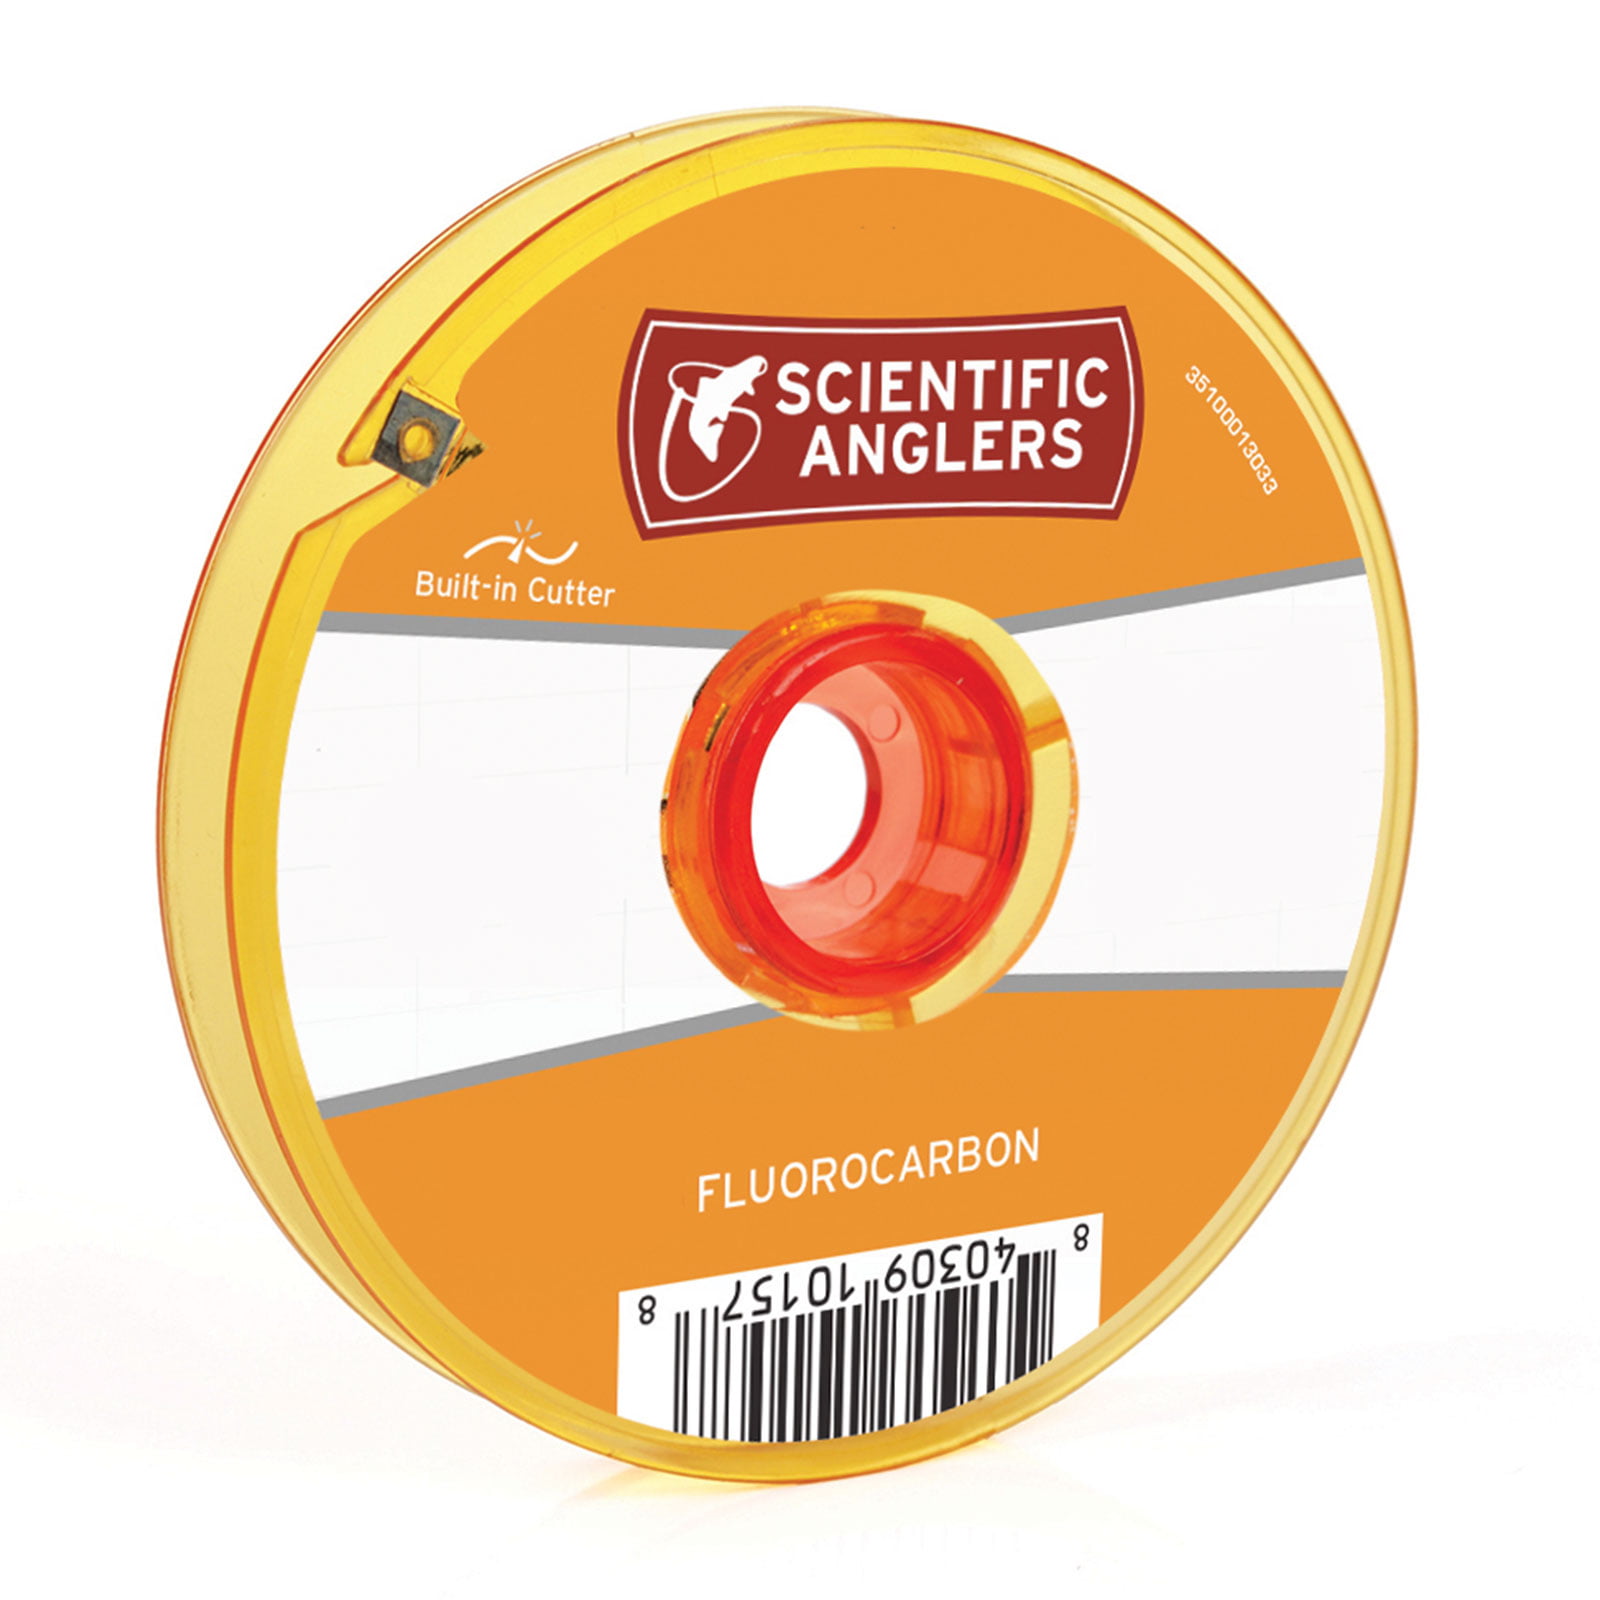 Scientific Anglers Freshwater Tippet 30m Spool 7x for sale online 